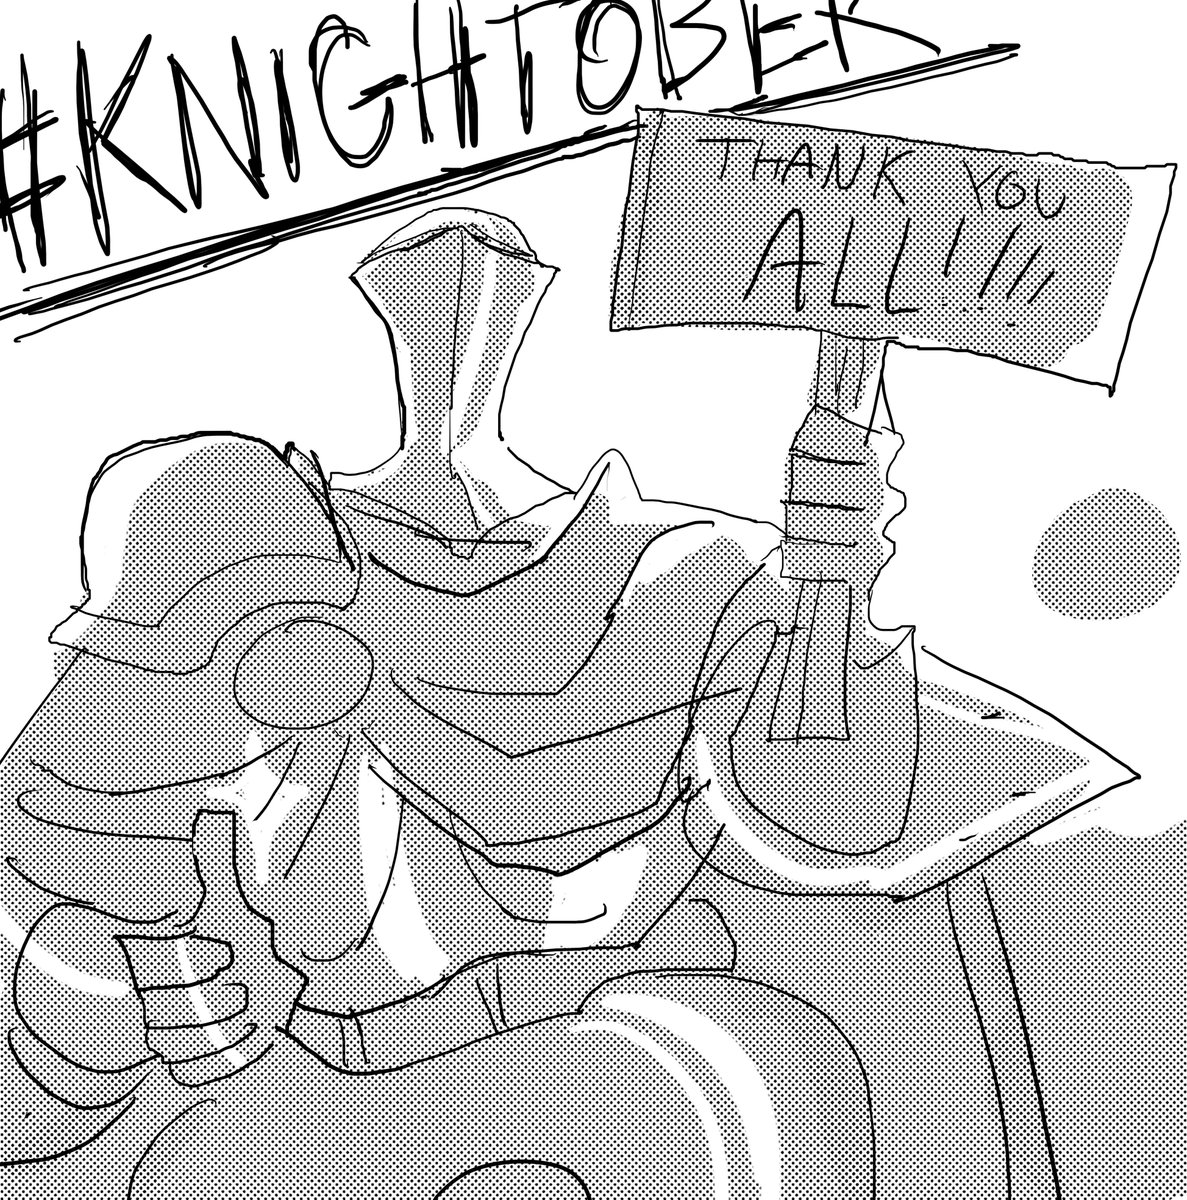 Thank you all for joining this challenge! If you've participated, please feel free to share it in this thread! And i know there are lots of great attempt a this #knightober ! 